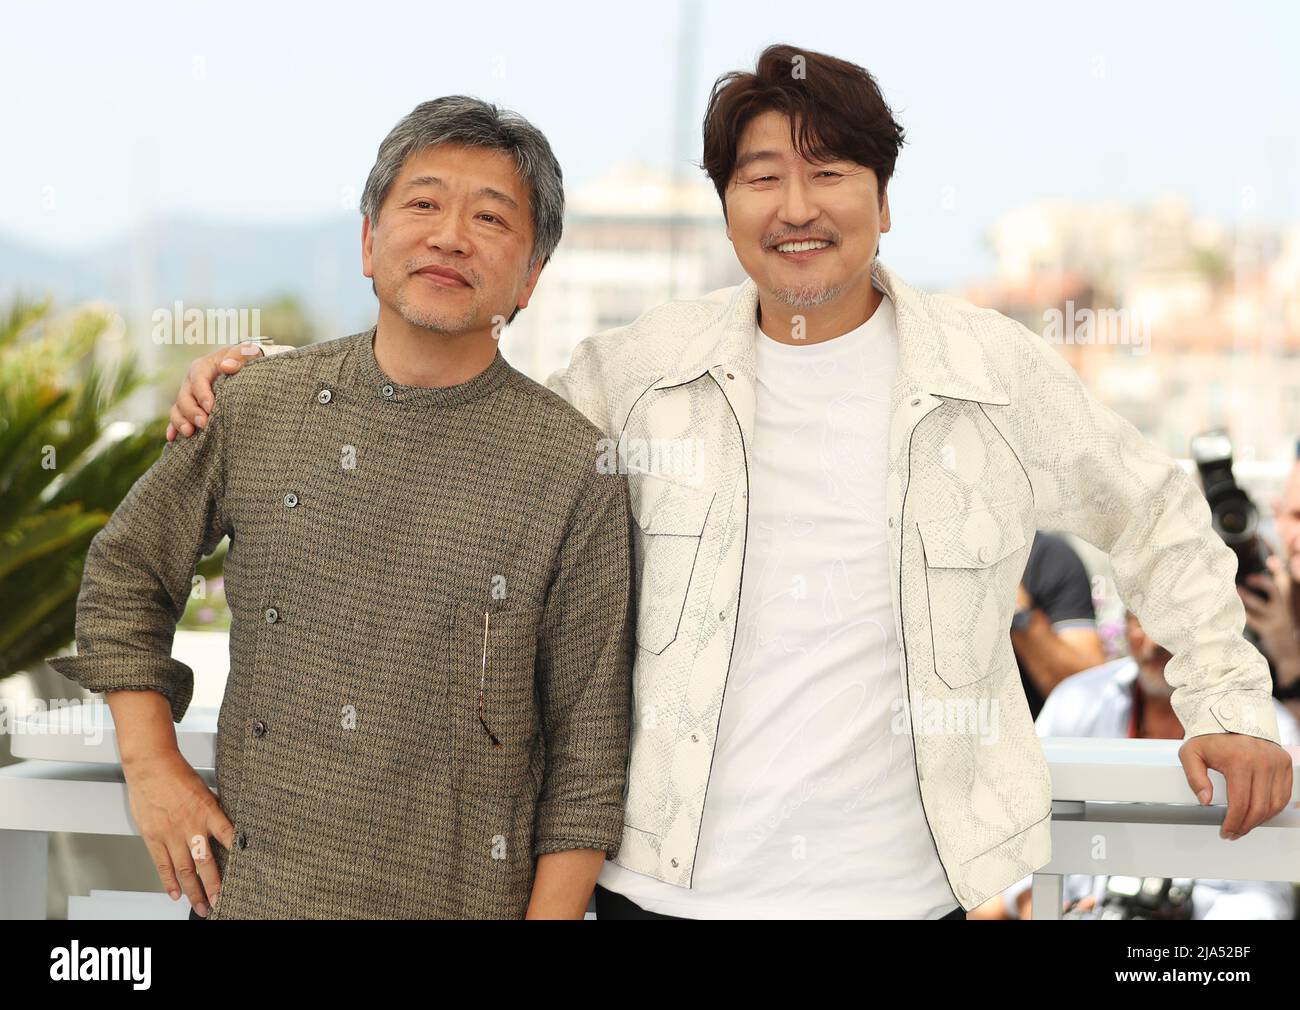 Cannes, France. 27th May, 2022. South Korean actor Song Kang-Ho (R) and Japanese film director Hirokazu Kore-Eda pose during a photocall for the film 'Broker (Les Bonnes Etoiles)' presented in the Official Competition at the 75th edition of the Cannes Film Festival in Cannes, southern France, on May 27, 2022. Credit: Gao Jing/Xinhua/Alamy Live News Stock Photo